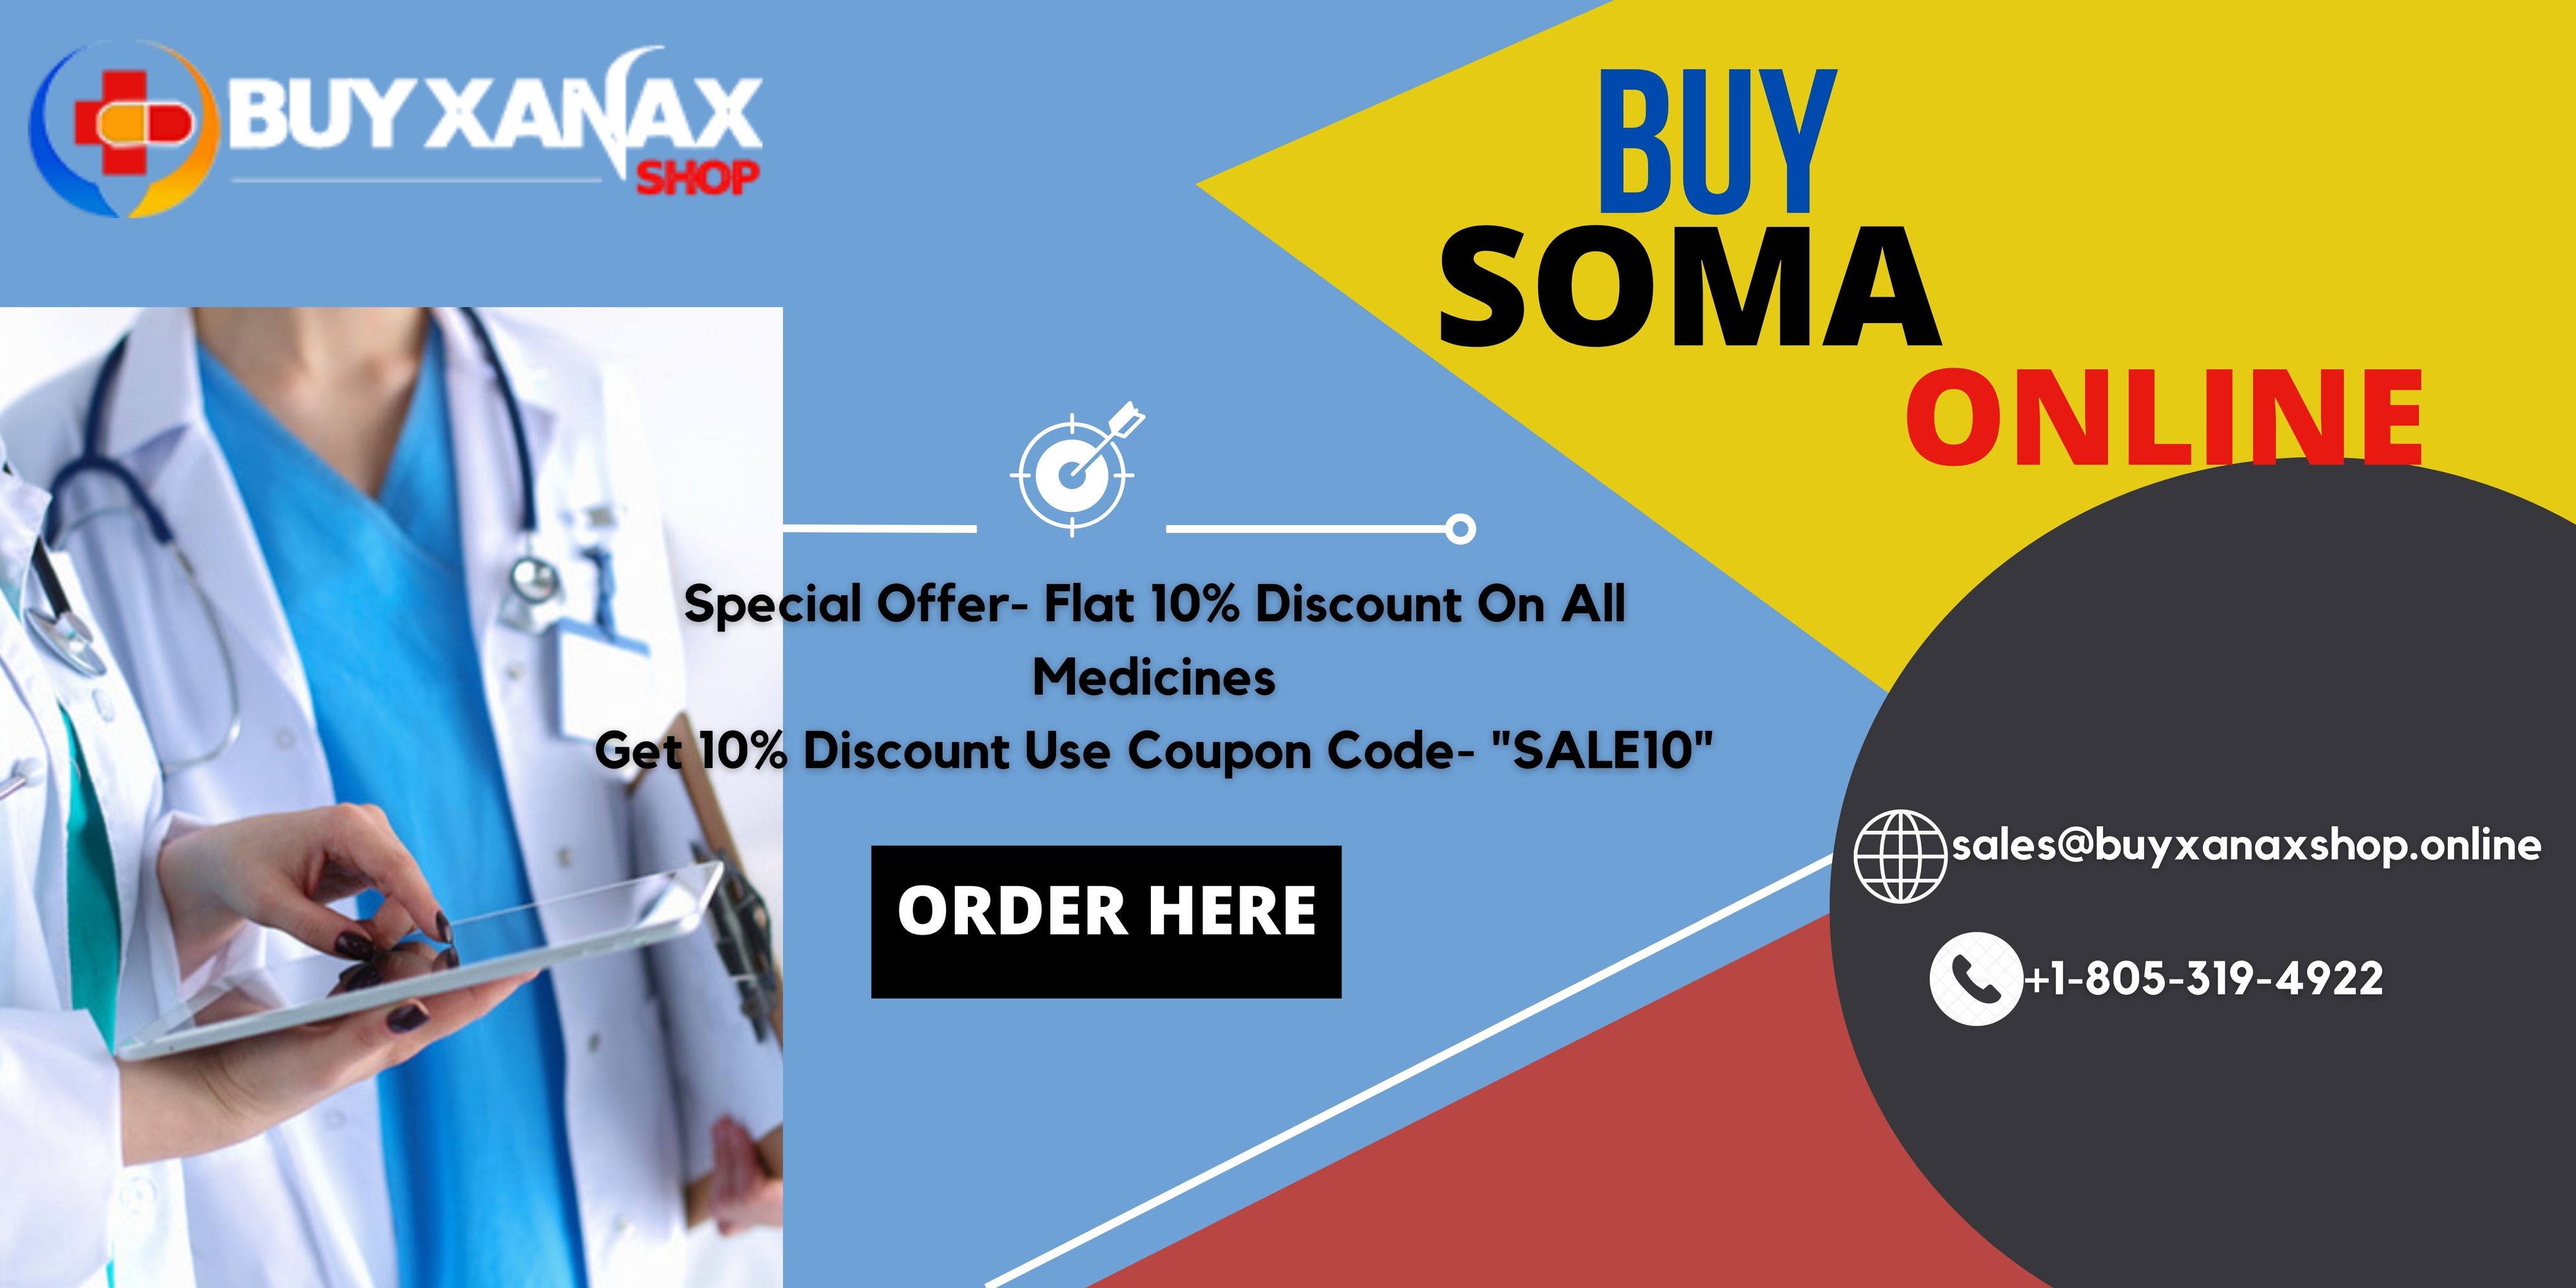 Buy Soma Online Used For Musculoskeletal Pain